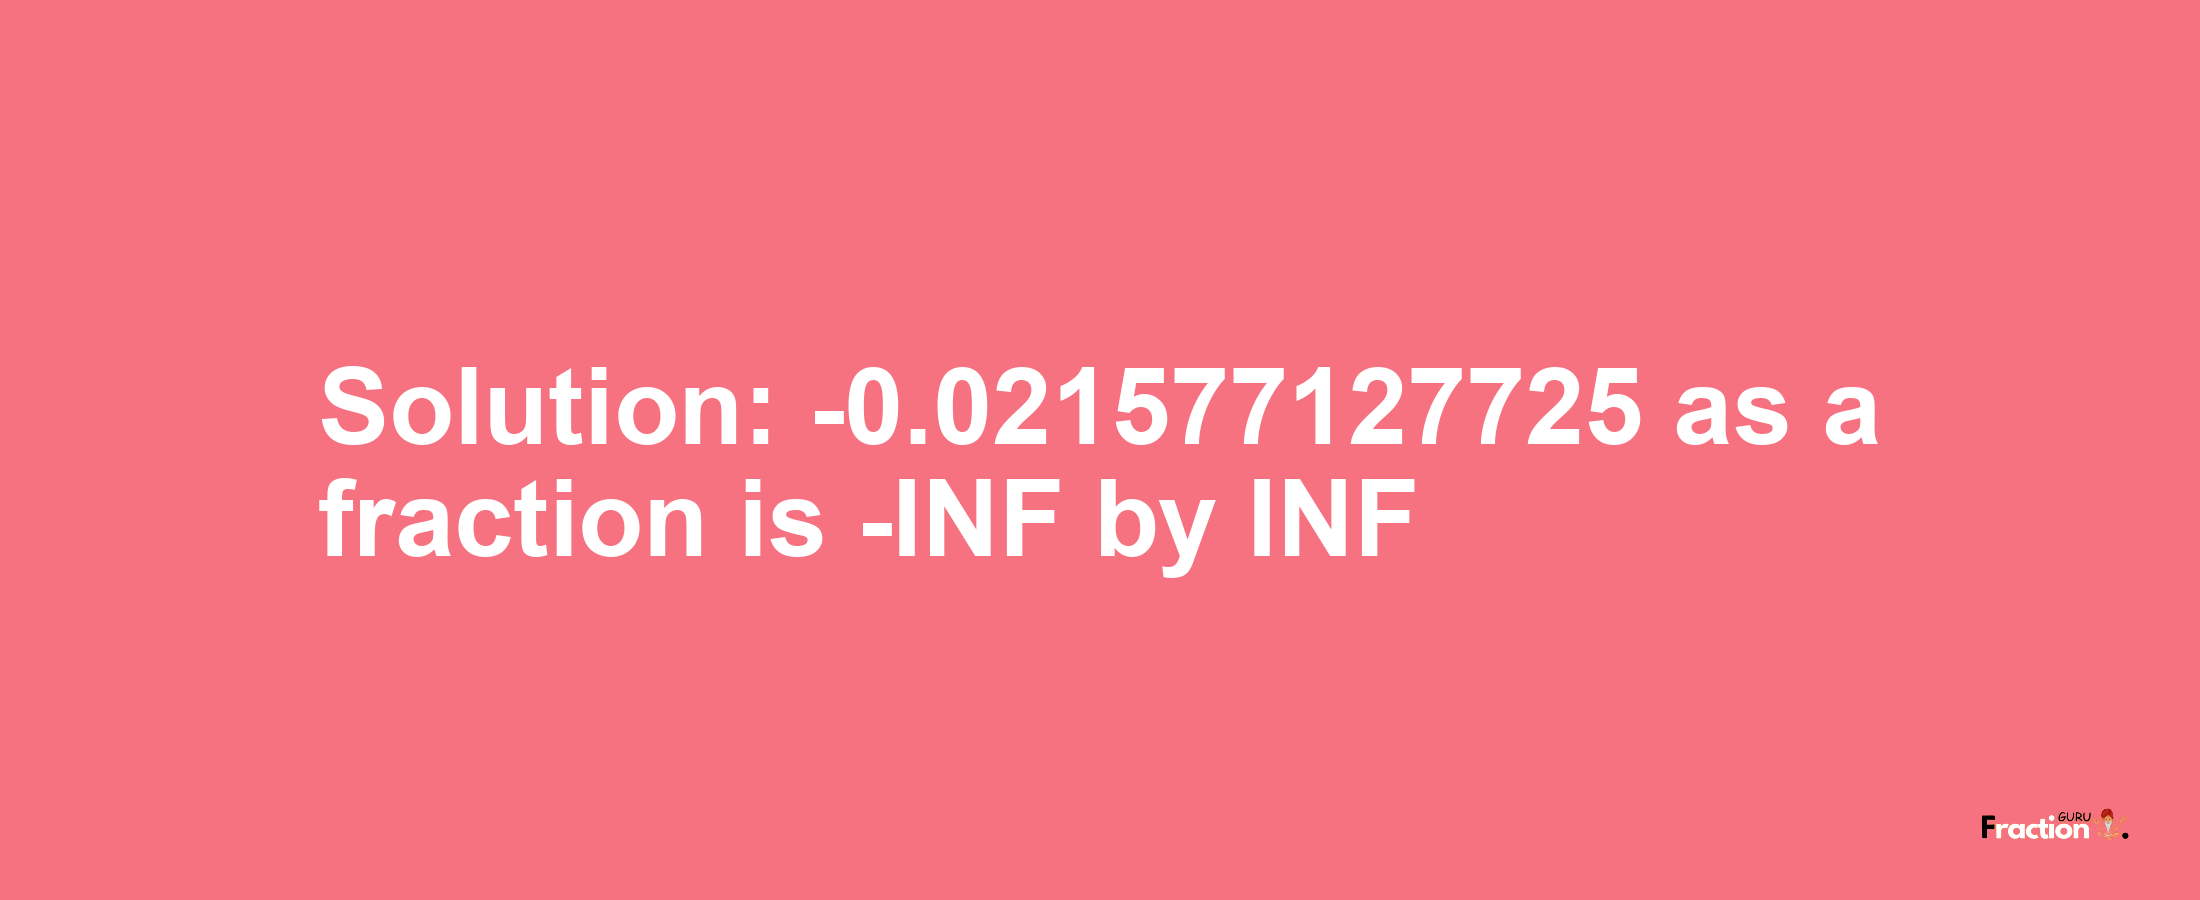 Solution:-0.021577127725 as a fraction is -INF/INF